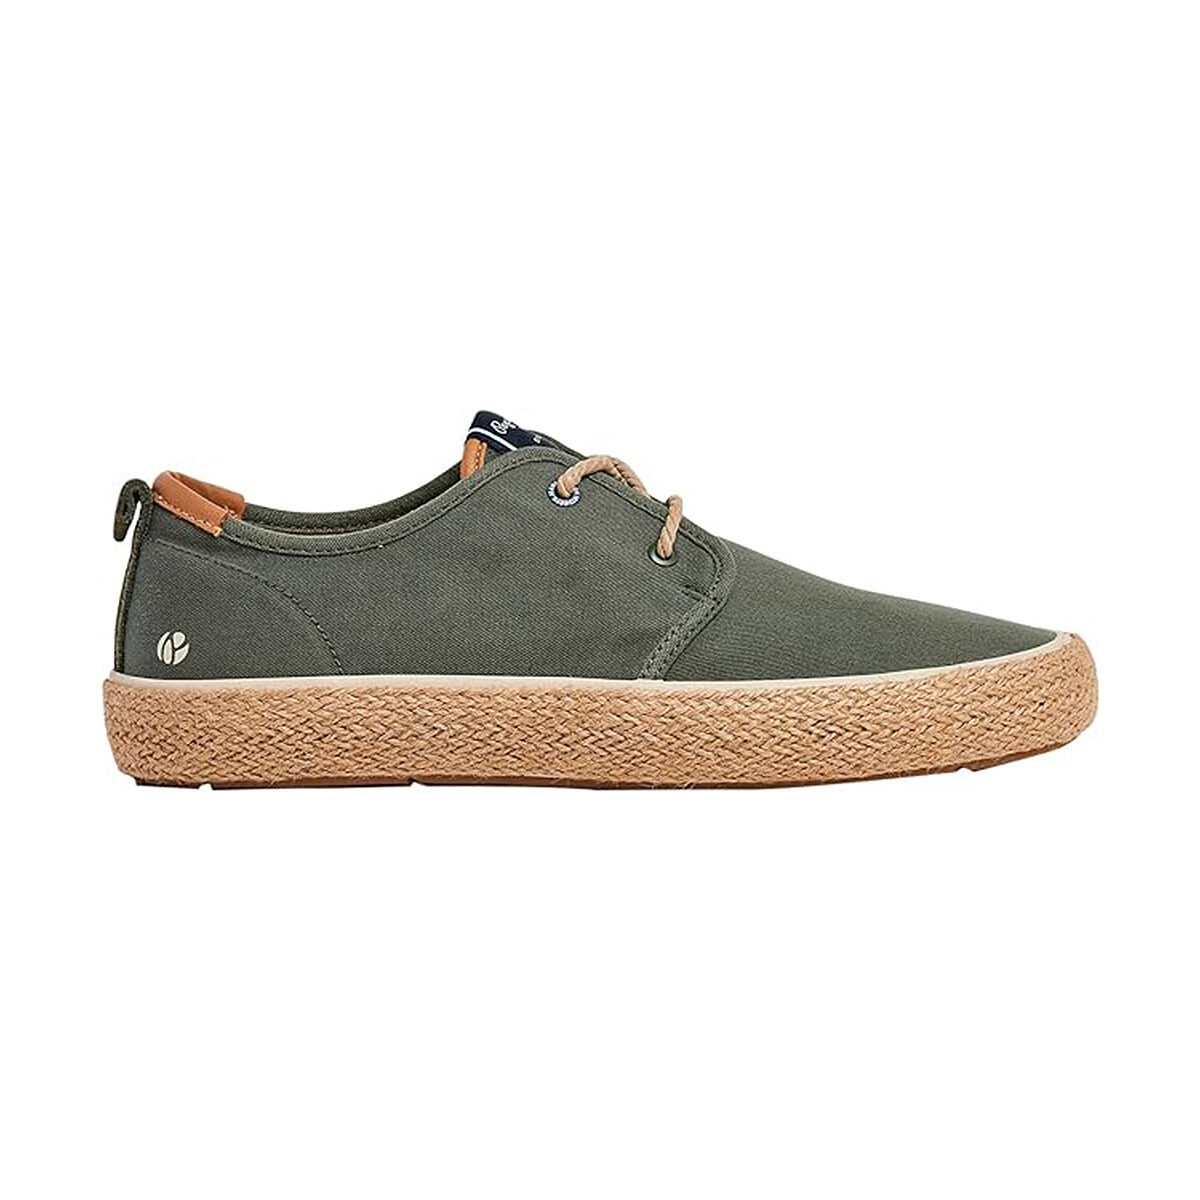 Chaussures Homme Baskets basses Pepe jeans SPORTS  PORT TOURISTE PMS10326 Vert